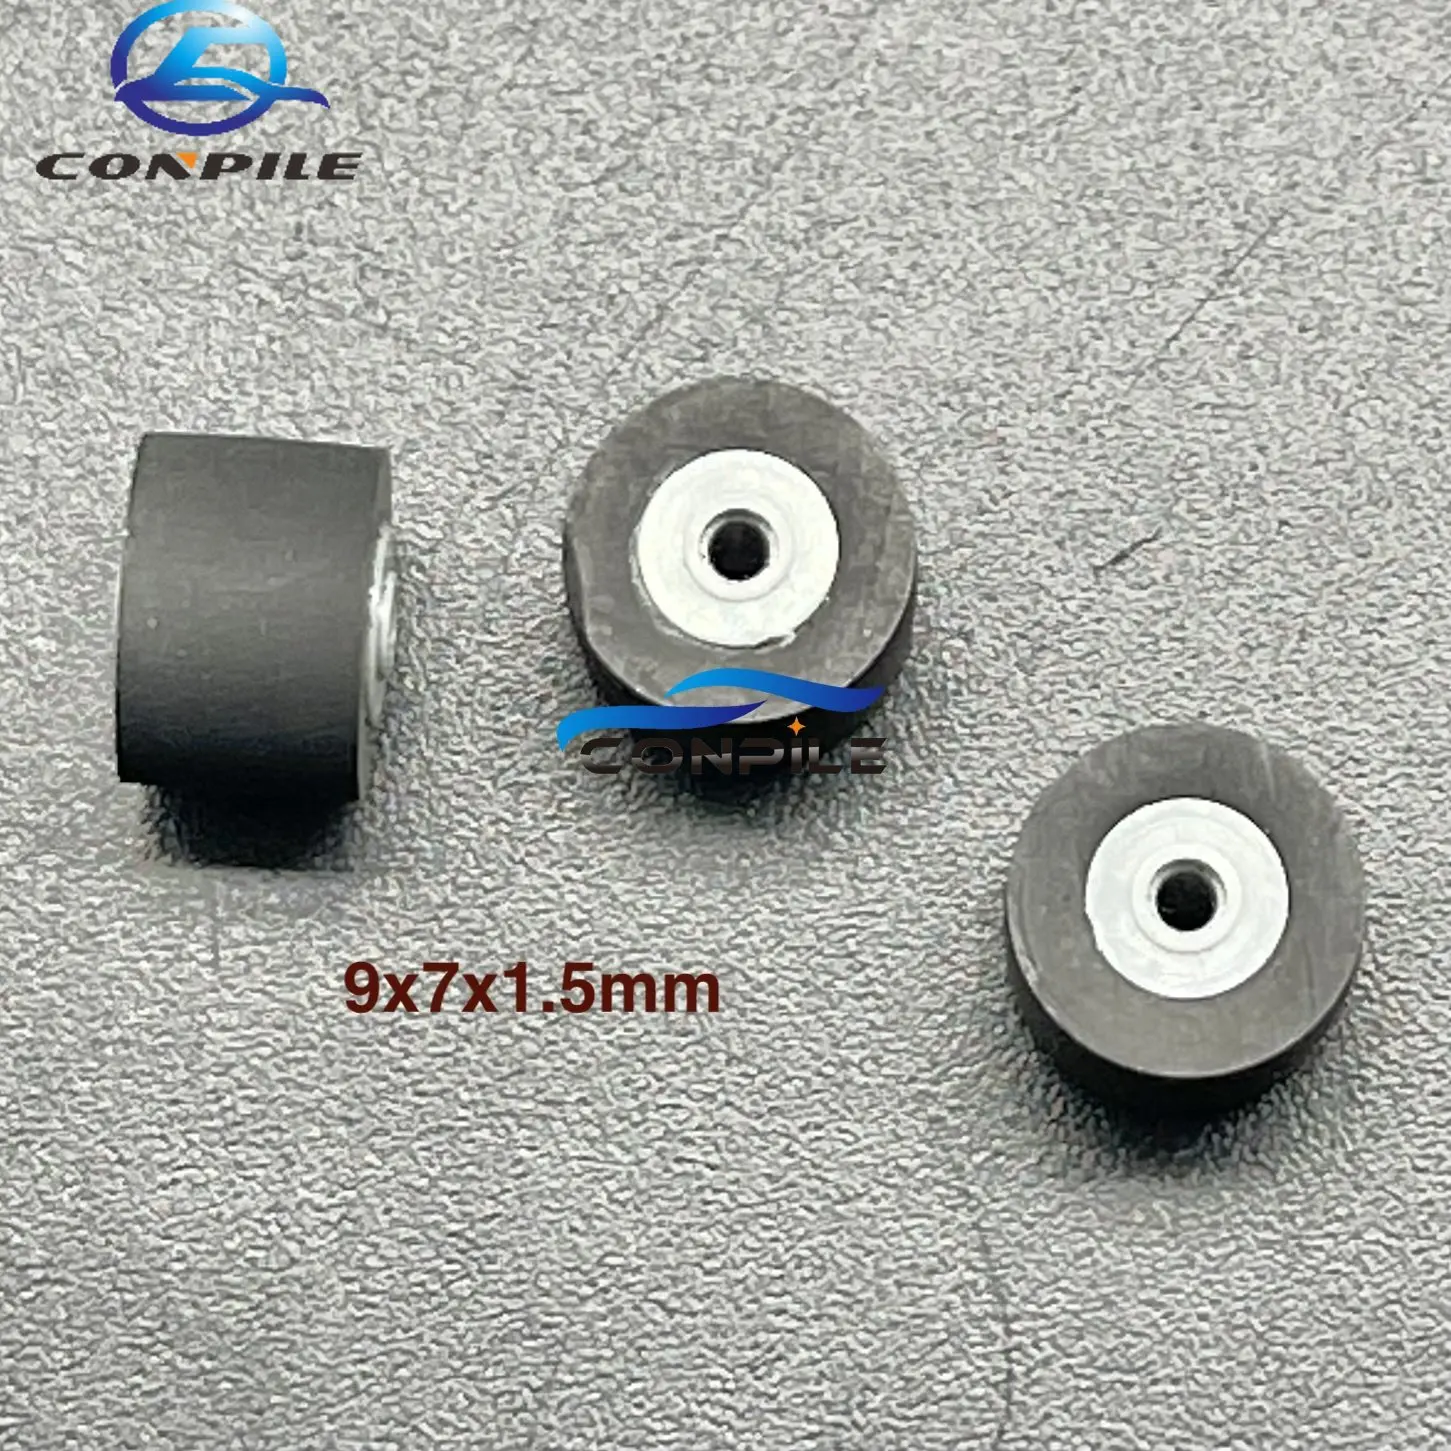 

3pcs 9mmx7x1.5 wheel belt pulley rubber pinch roller for audio recorder cassette deck tape recorder Stereo player